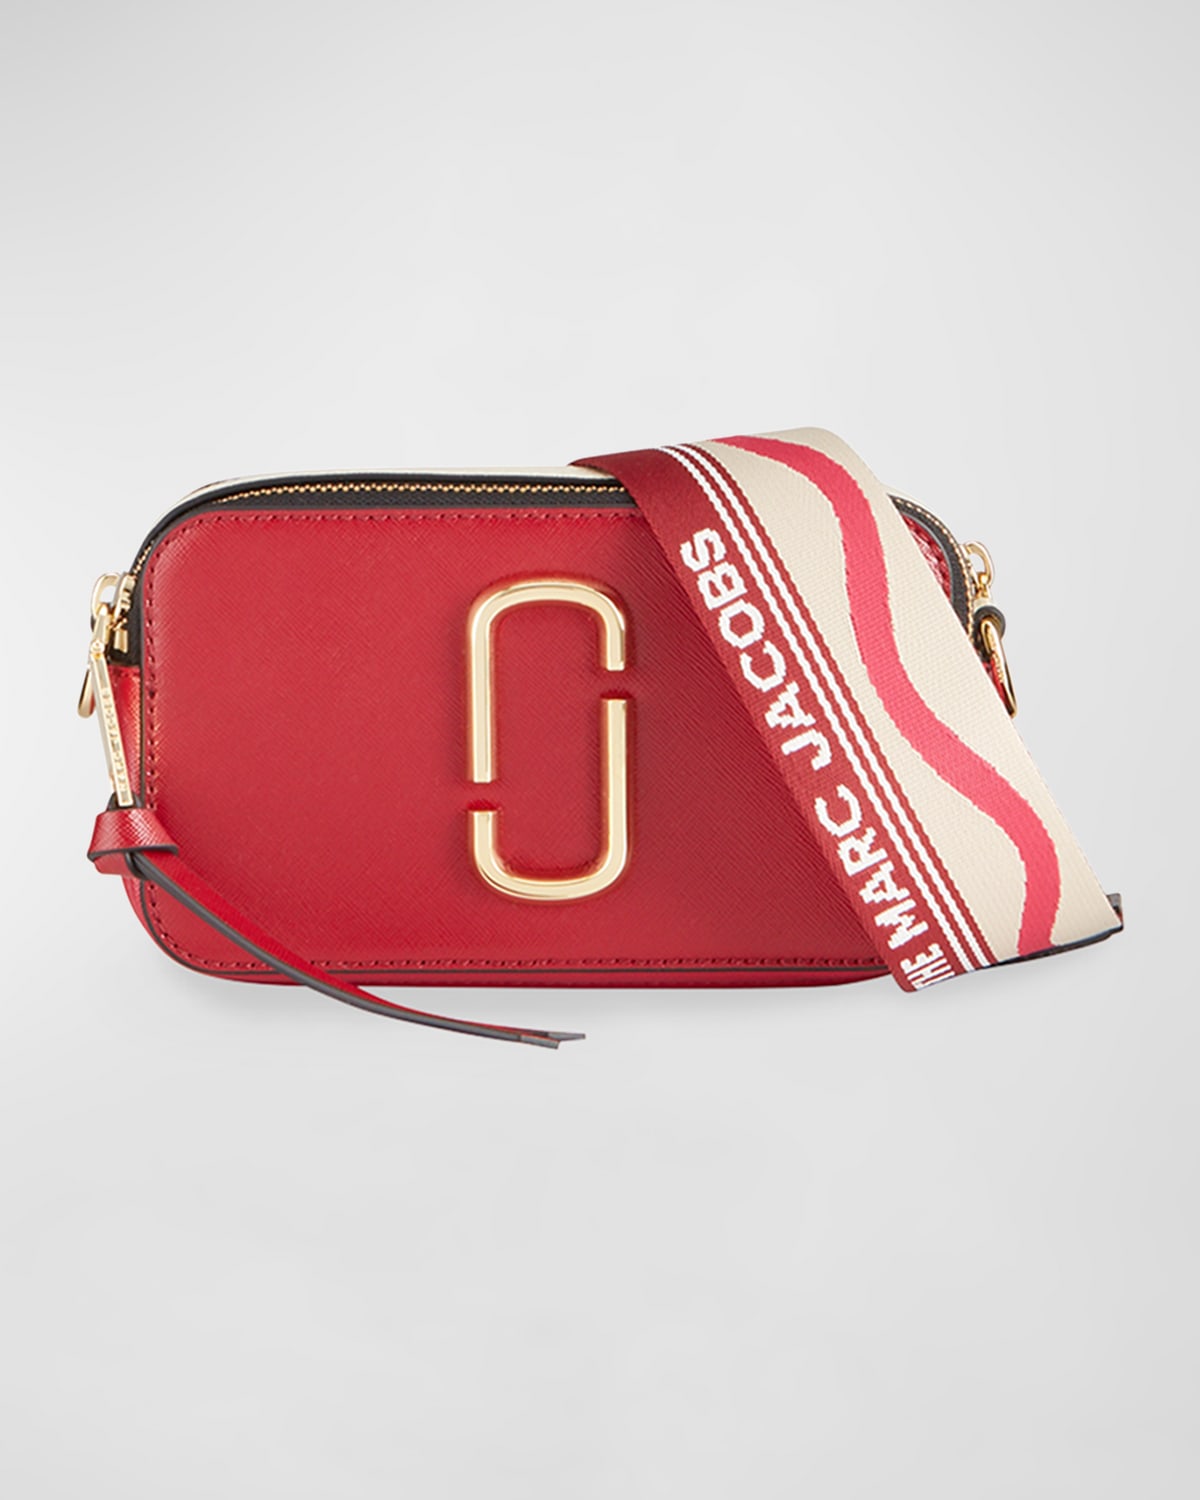 MARC JACOBS (THE) Marc Jacobs The Colorblock Snapshot Camera Bag - Stylemyle